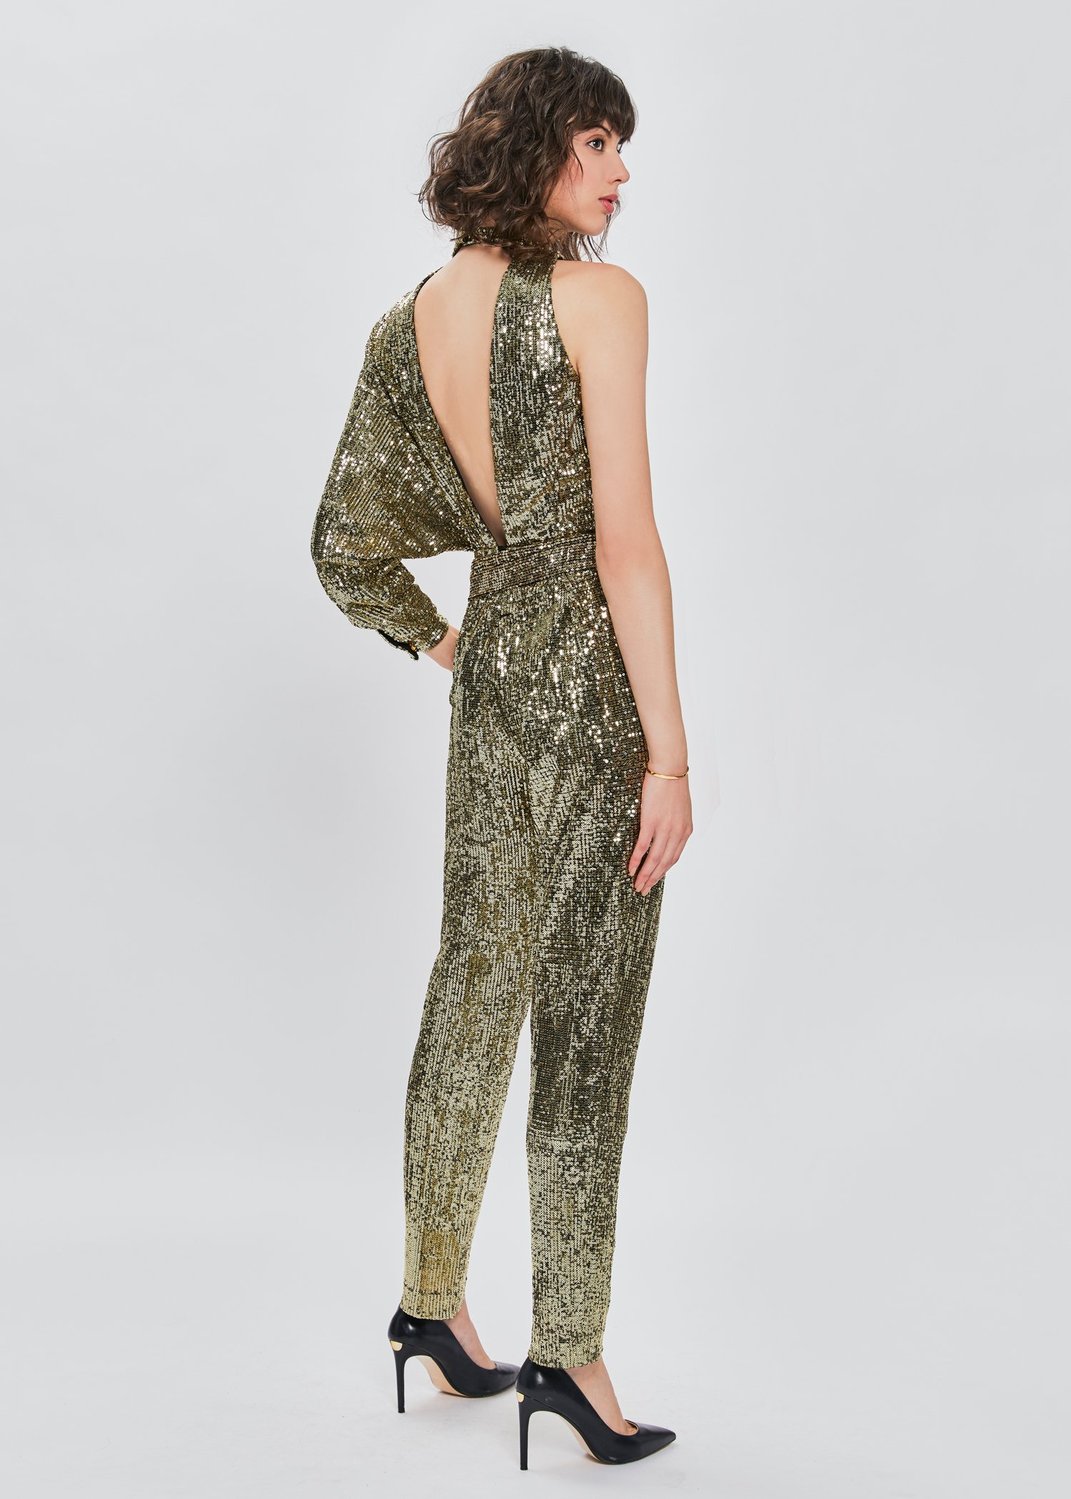 Gold Sequin Designer Jumpsuit Perfect Outfit for Special Occasions